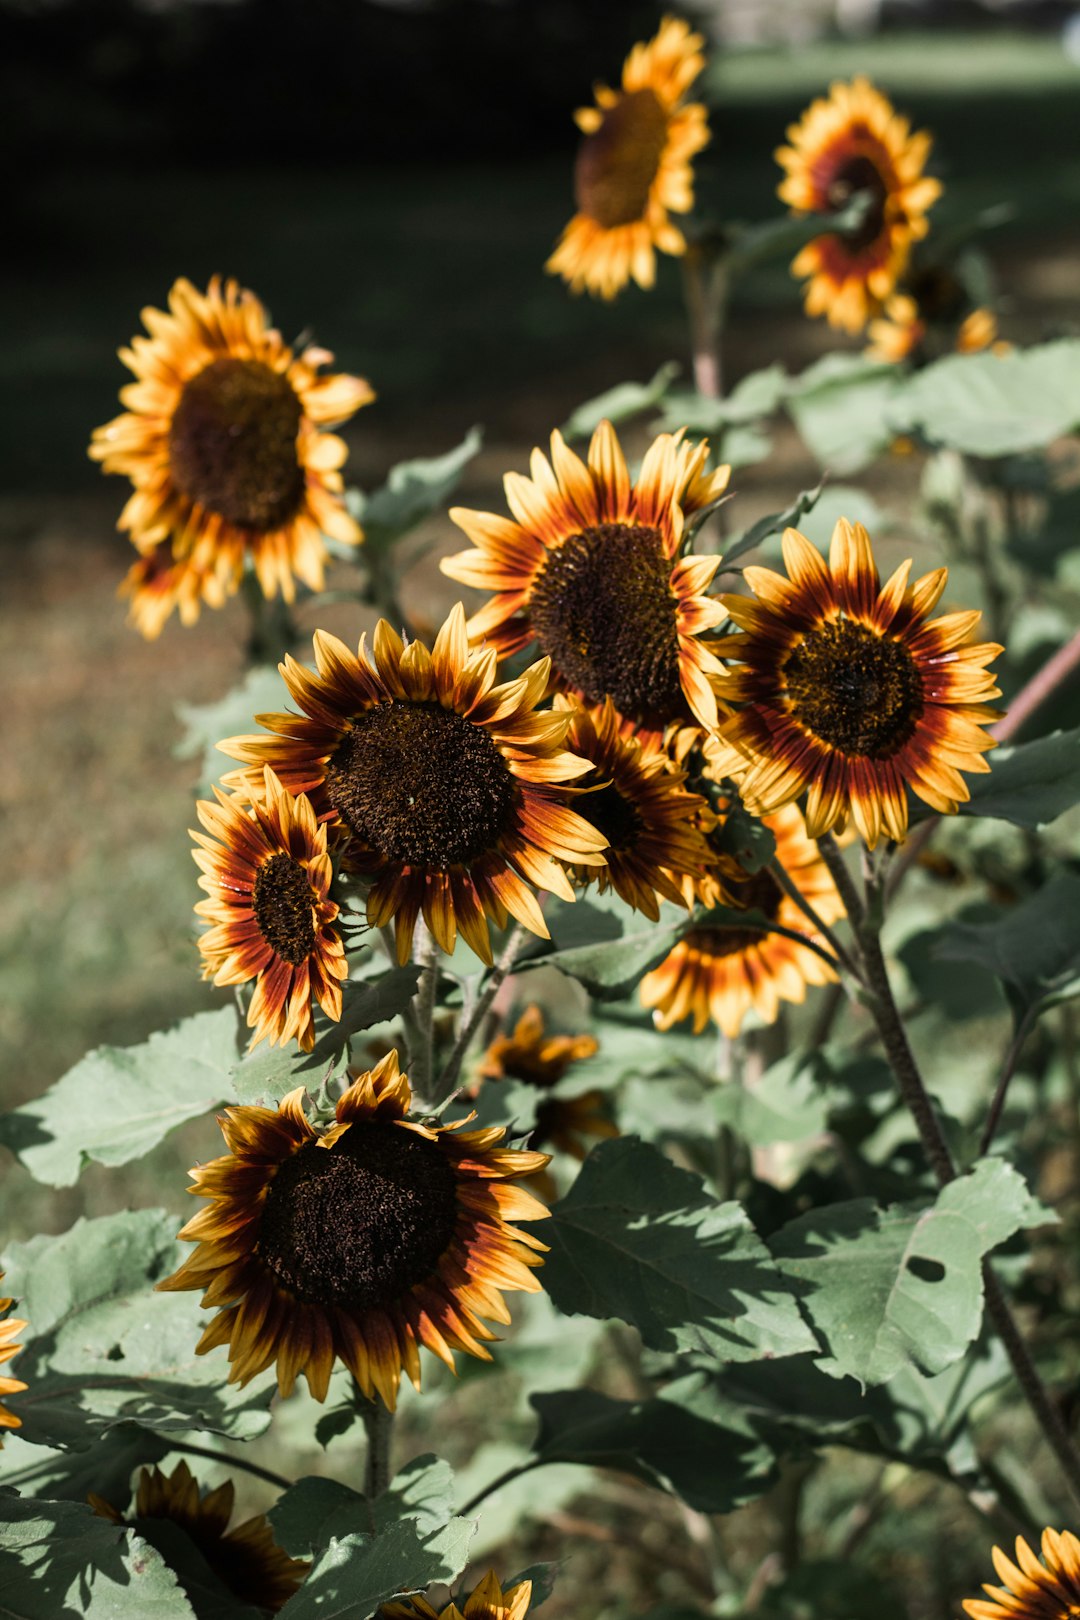 yellow-and-black sunflowers during day